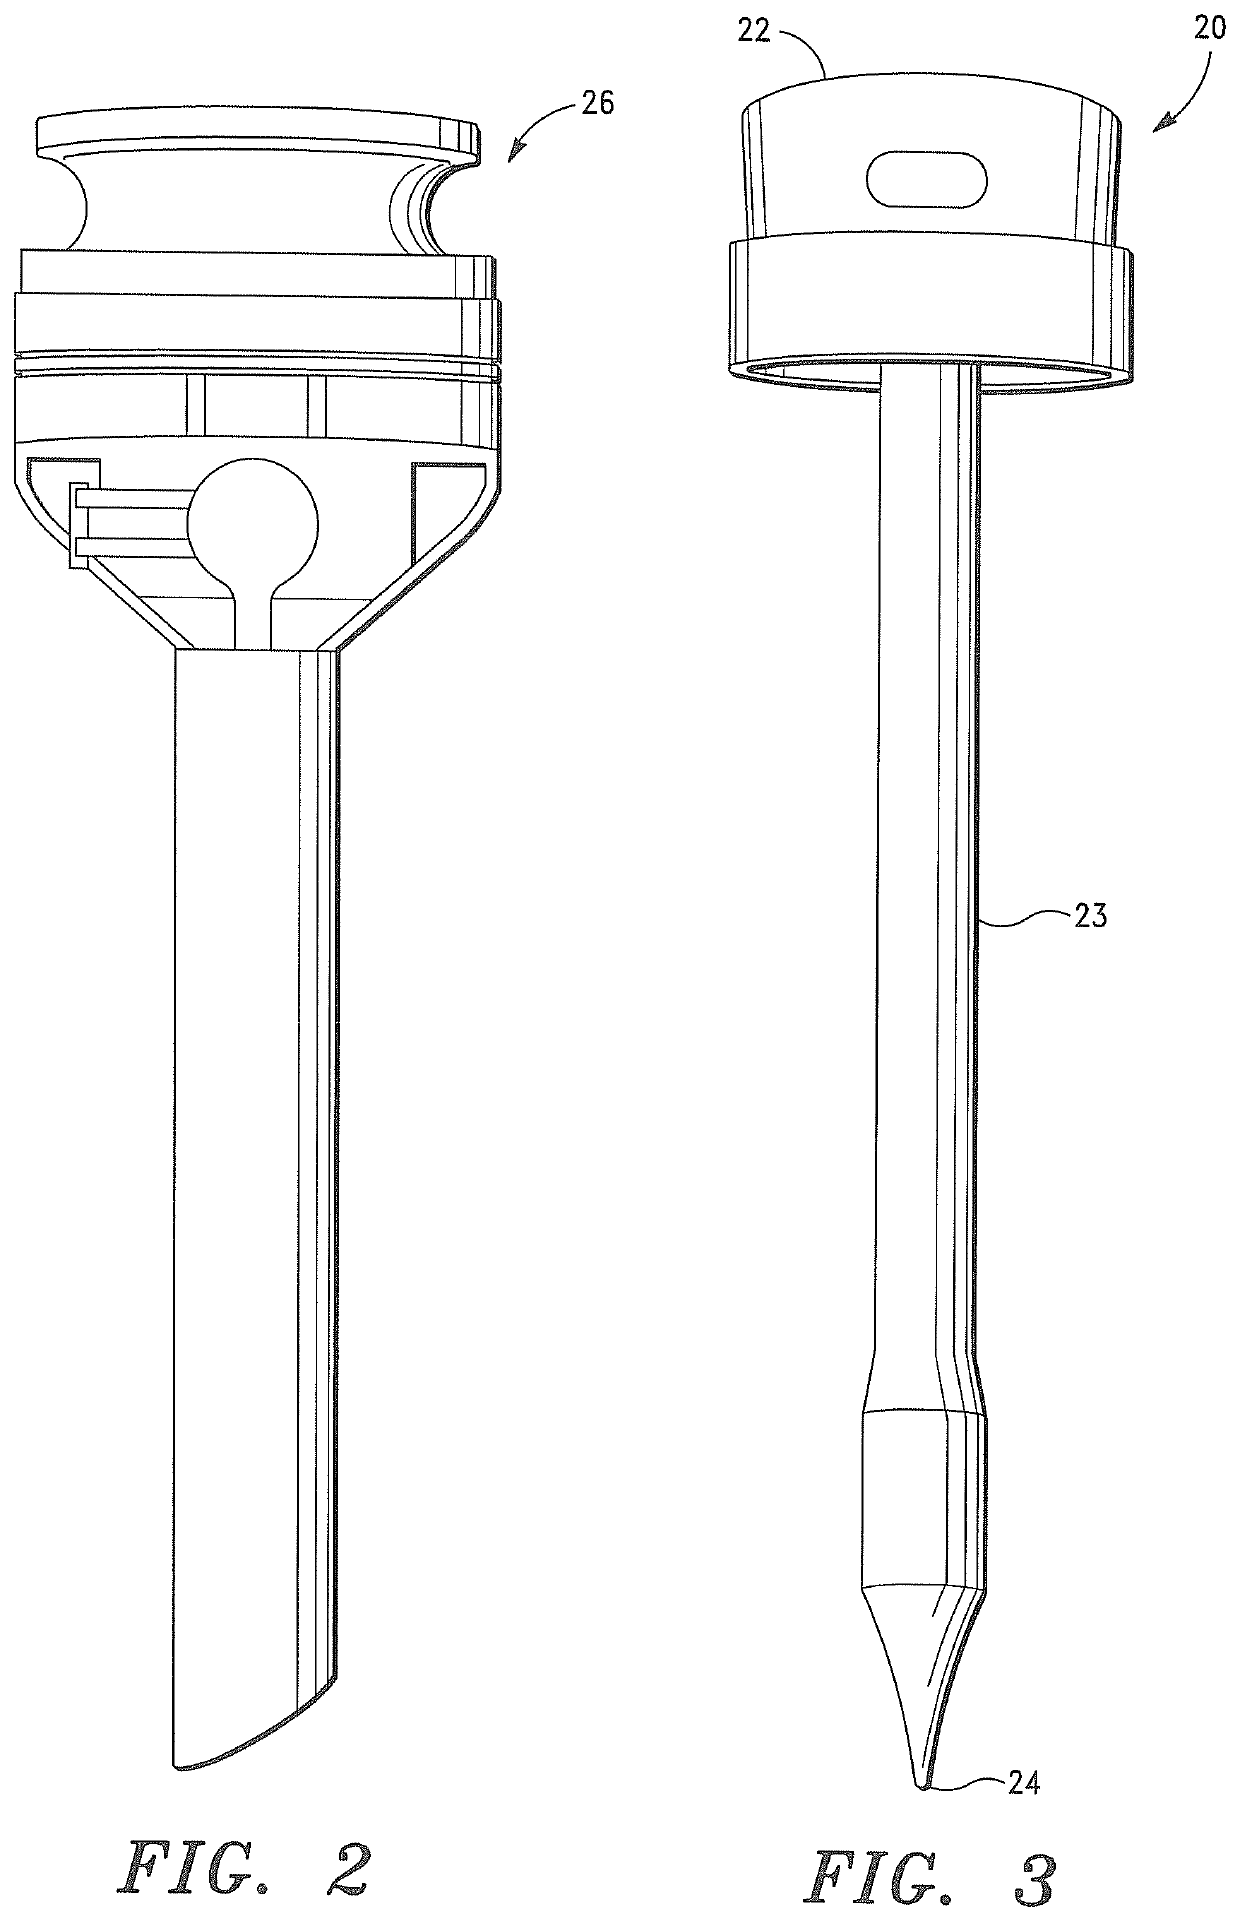 Biological tissue access and closure apparatus, systems and methods